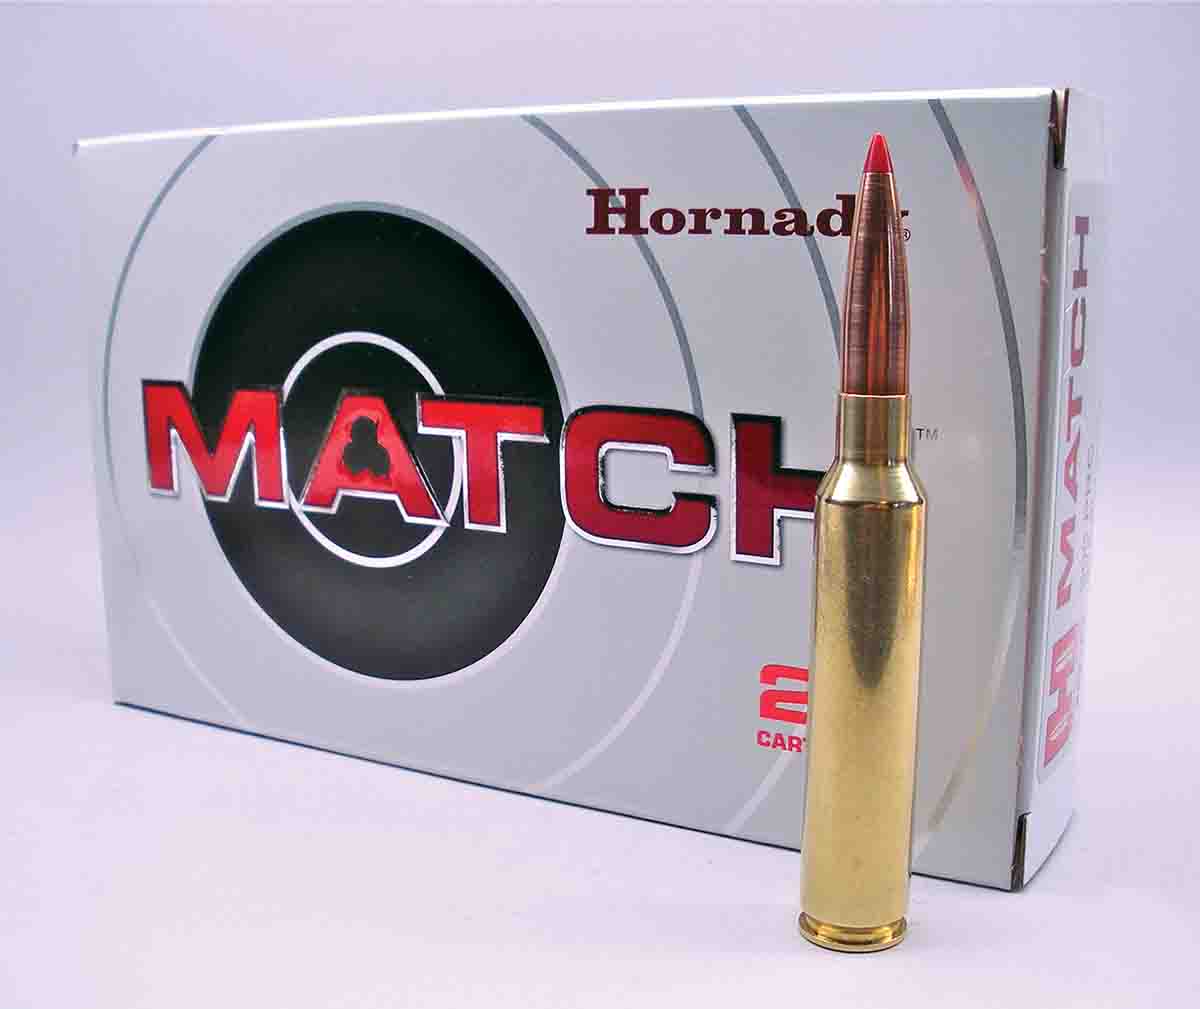 The Hornady .300 Precision Rifle Cartridge features a 225-grain ELD Match bullet at 2,810 fps.